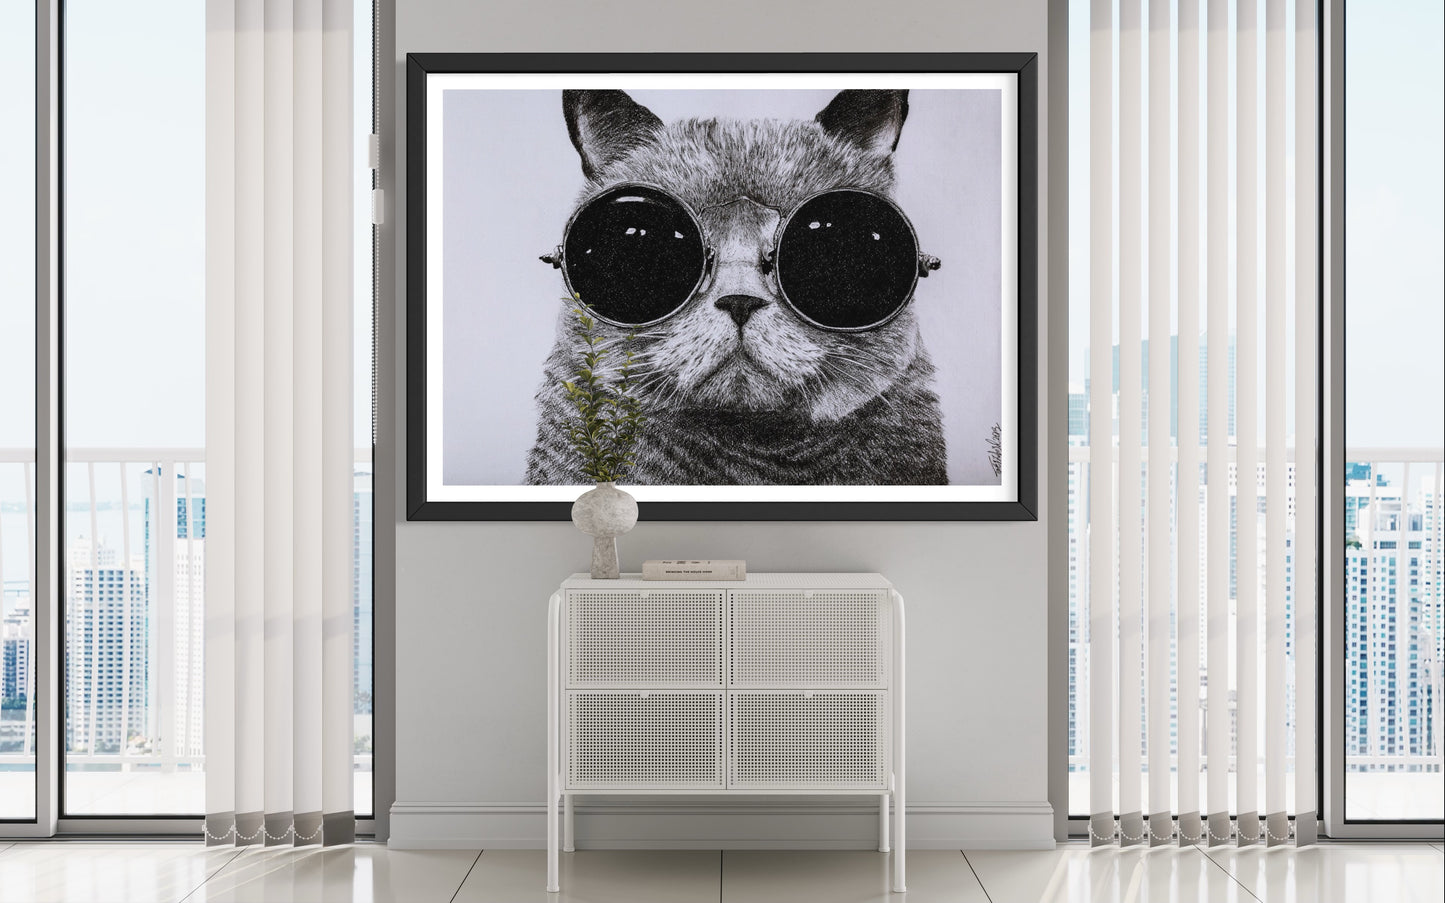 The Cat With Glasses